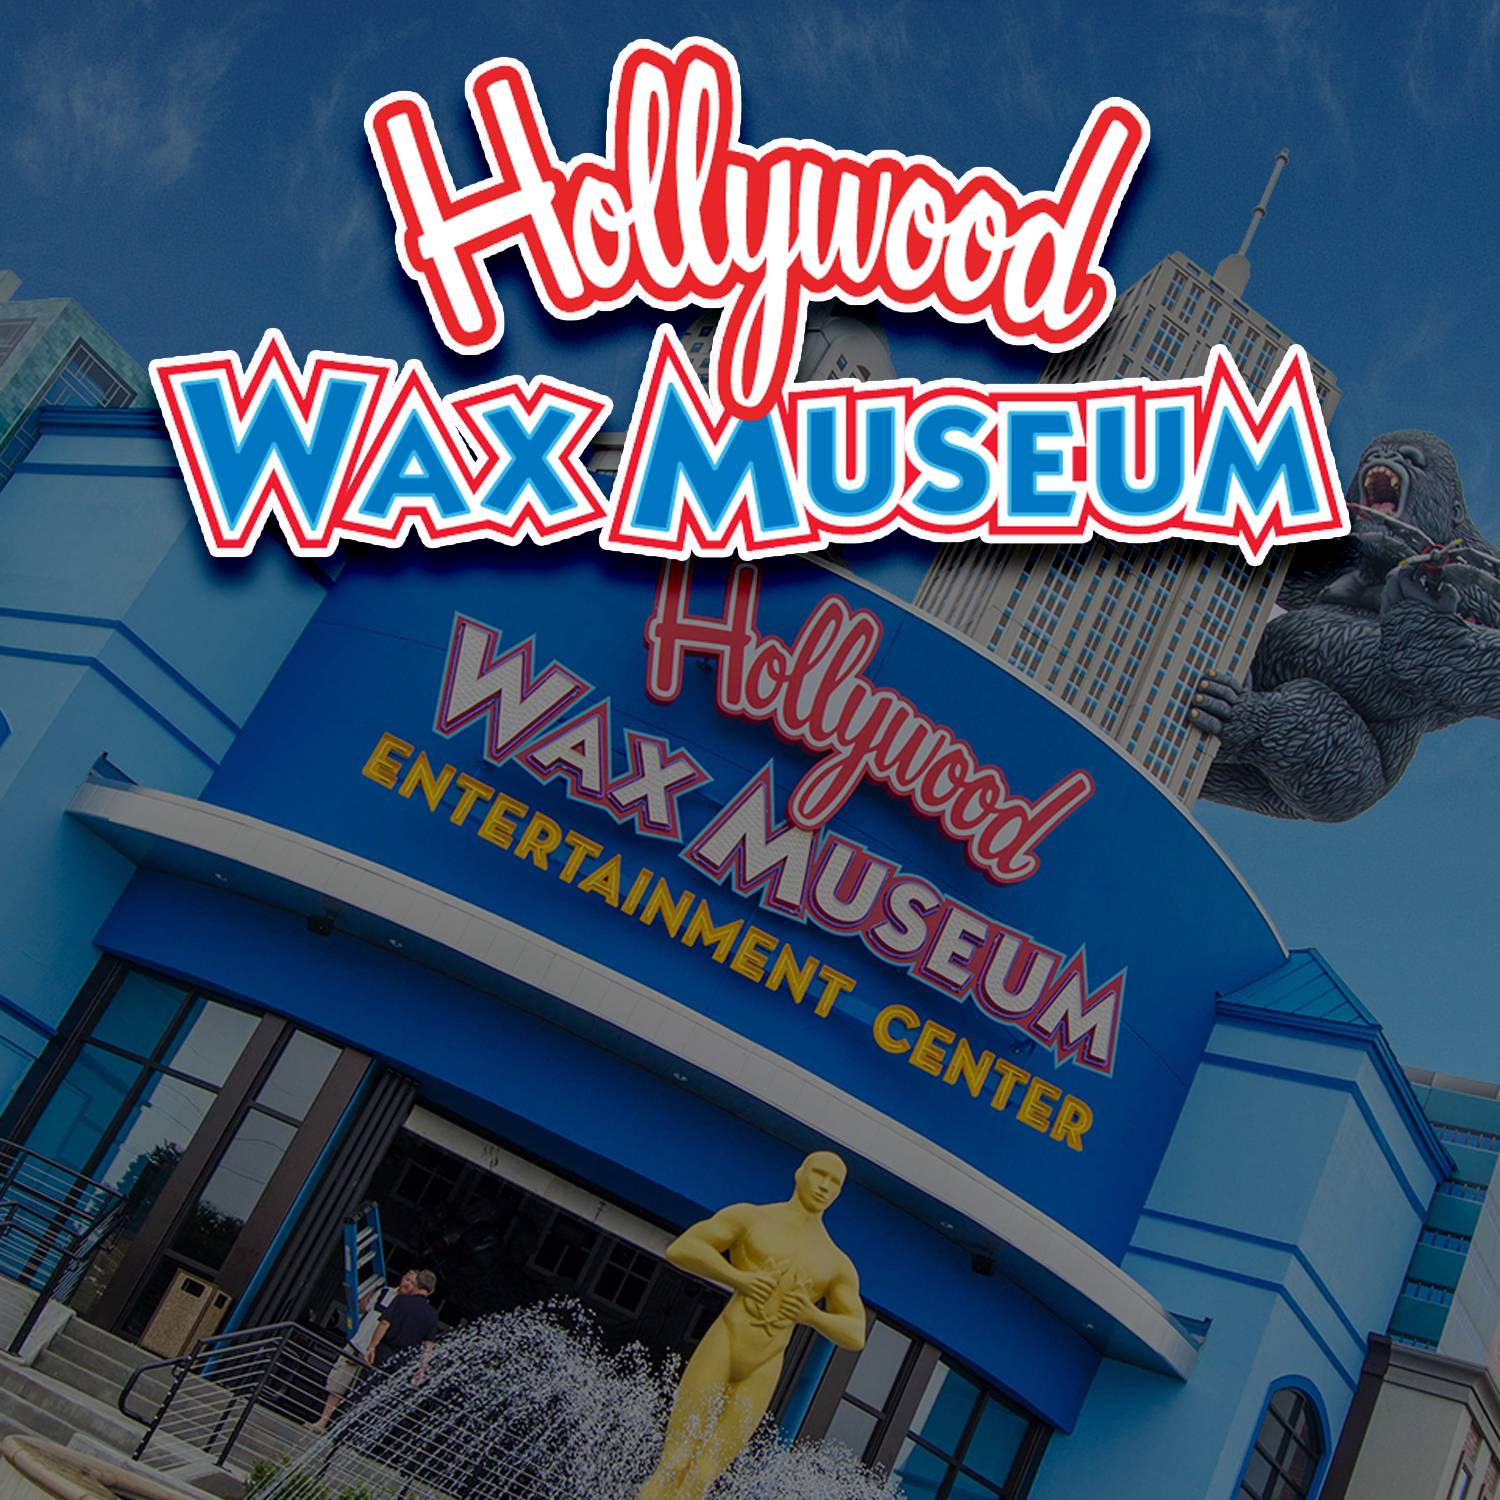 Ticket To Hollywood Wax Museum - Celebrity Photo Fun